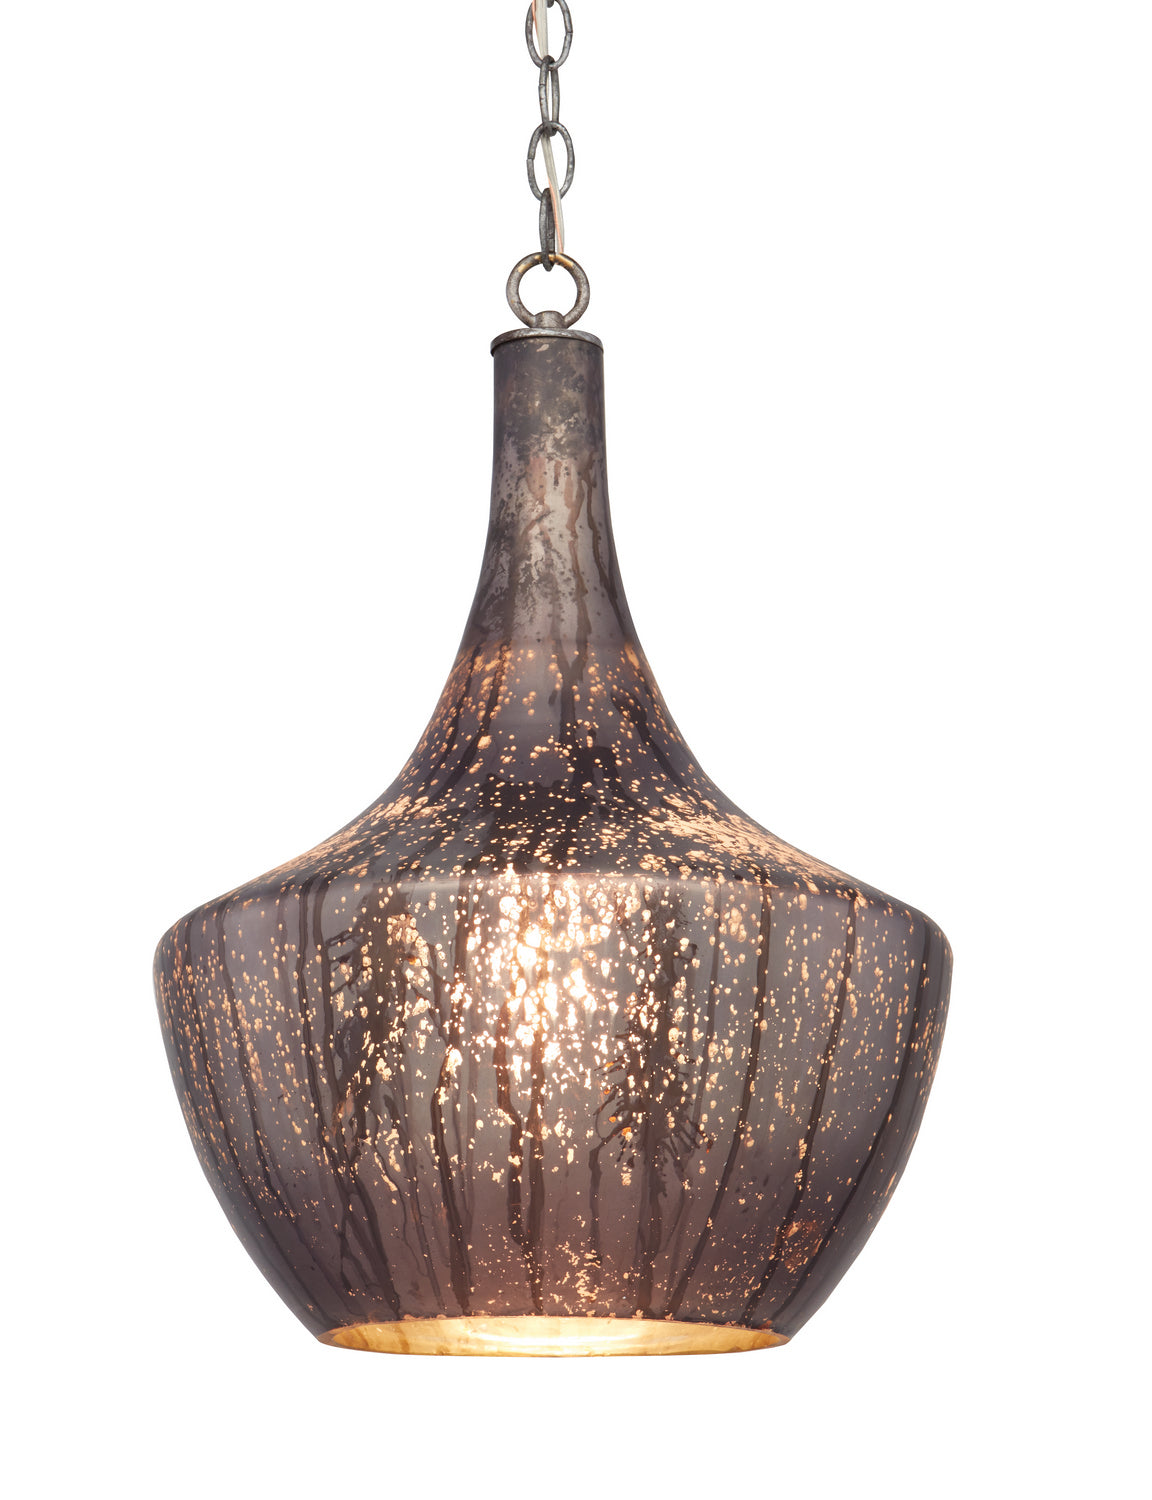 One Light Pendant from the Segreto collection in Antique Gray/Cloud finish